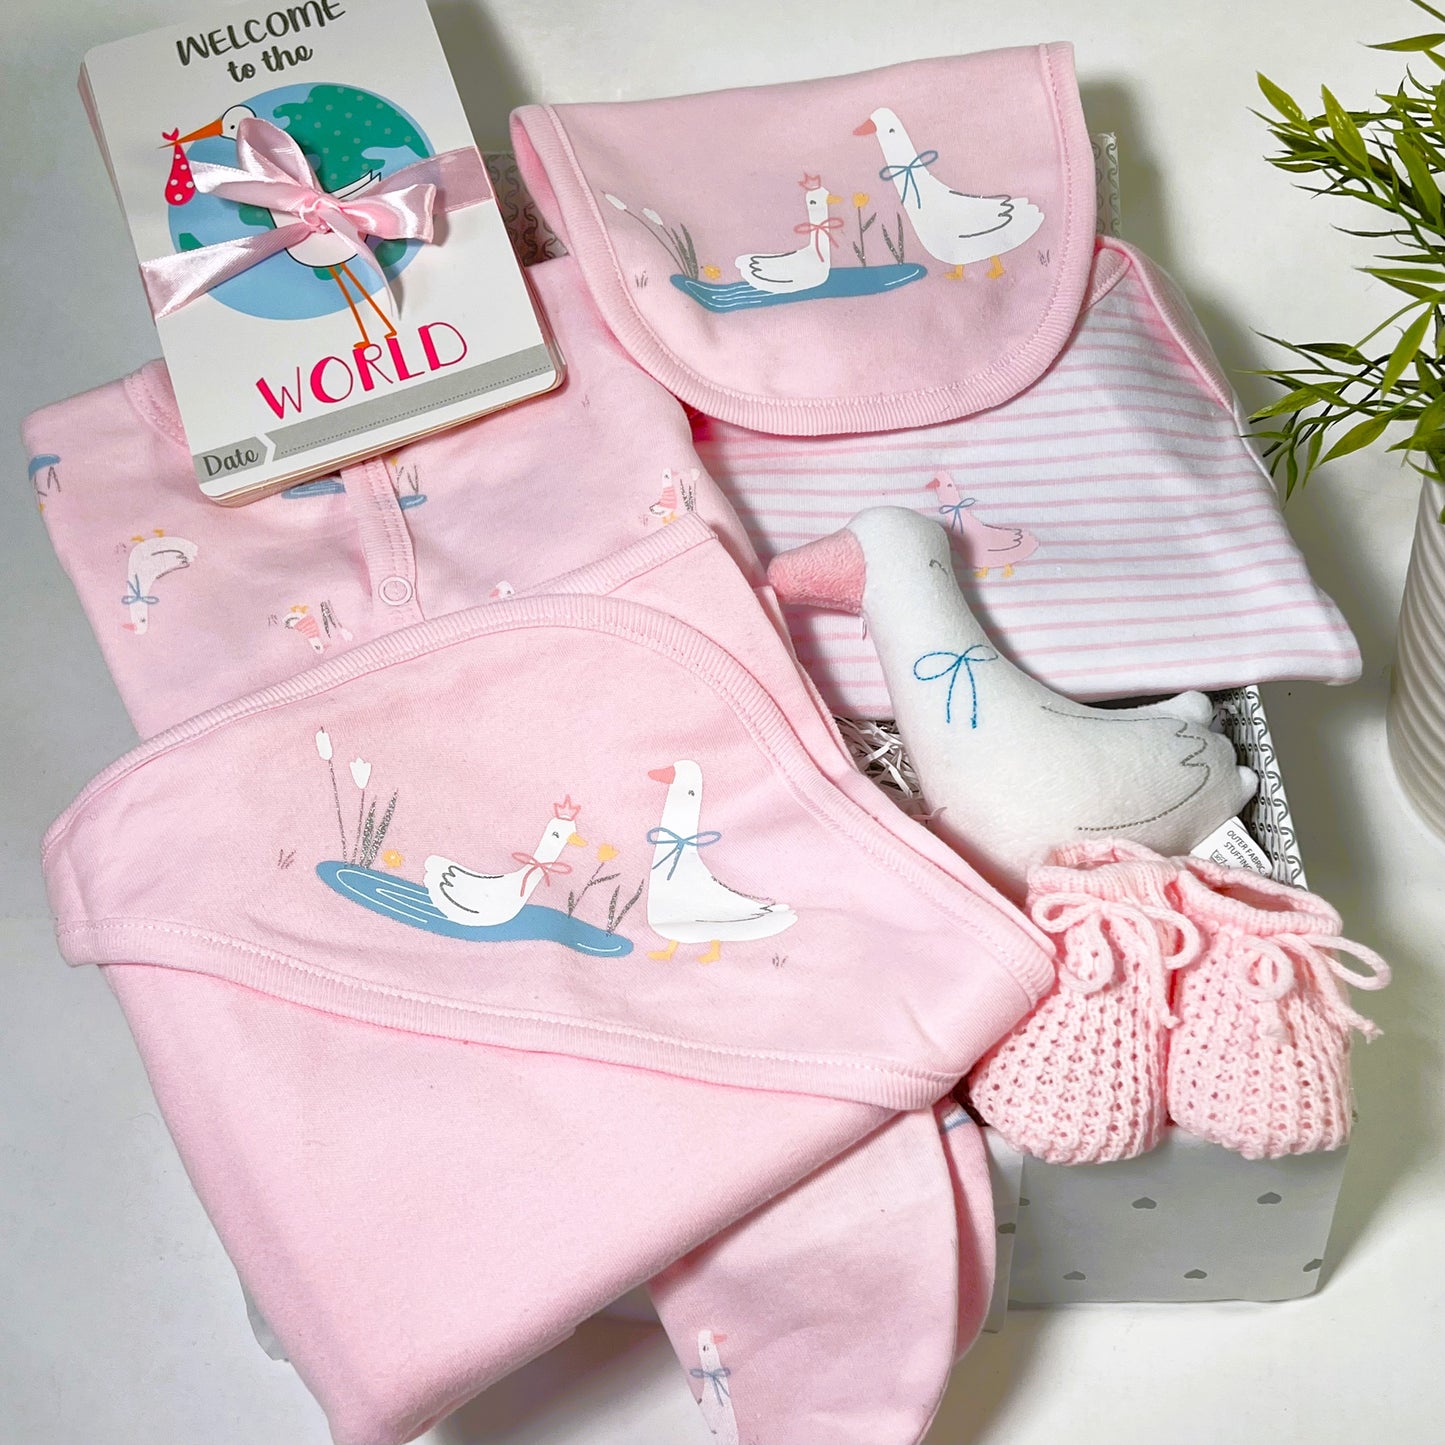 Pink New Baby Girl Gift Hamper Box, Roack-a-bye Baby Geese Layette Set, Baby Shower Gifts for Girls